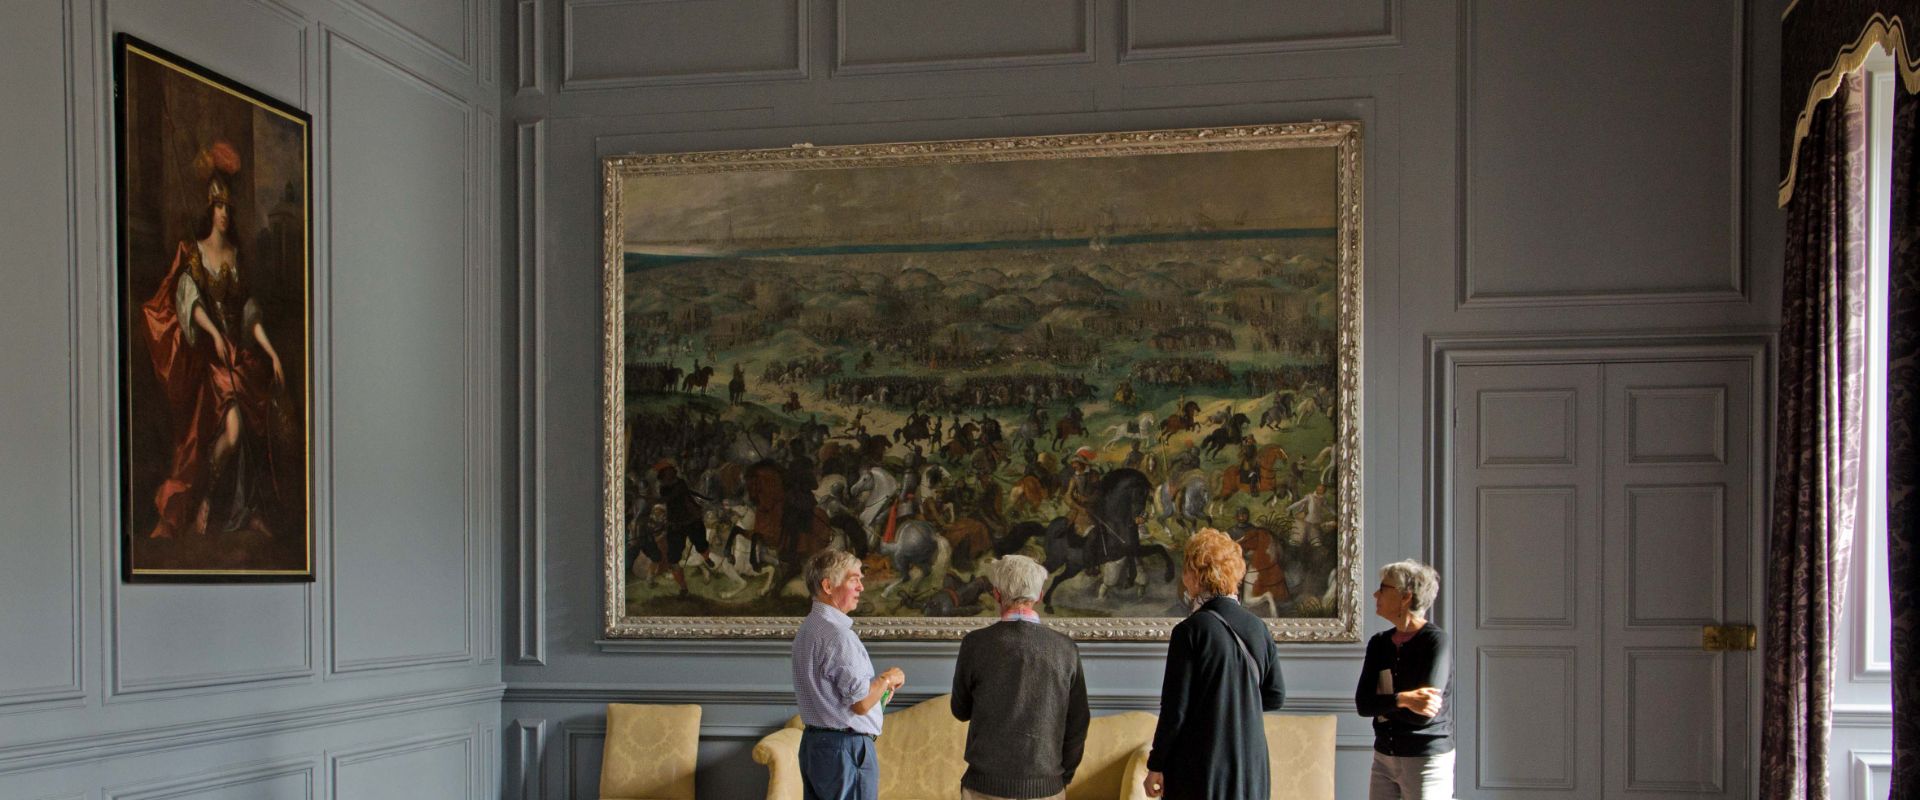 Admiring a painting inside Great Fulford